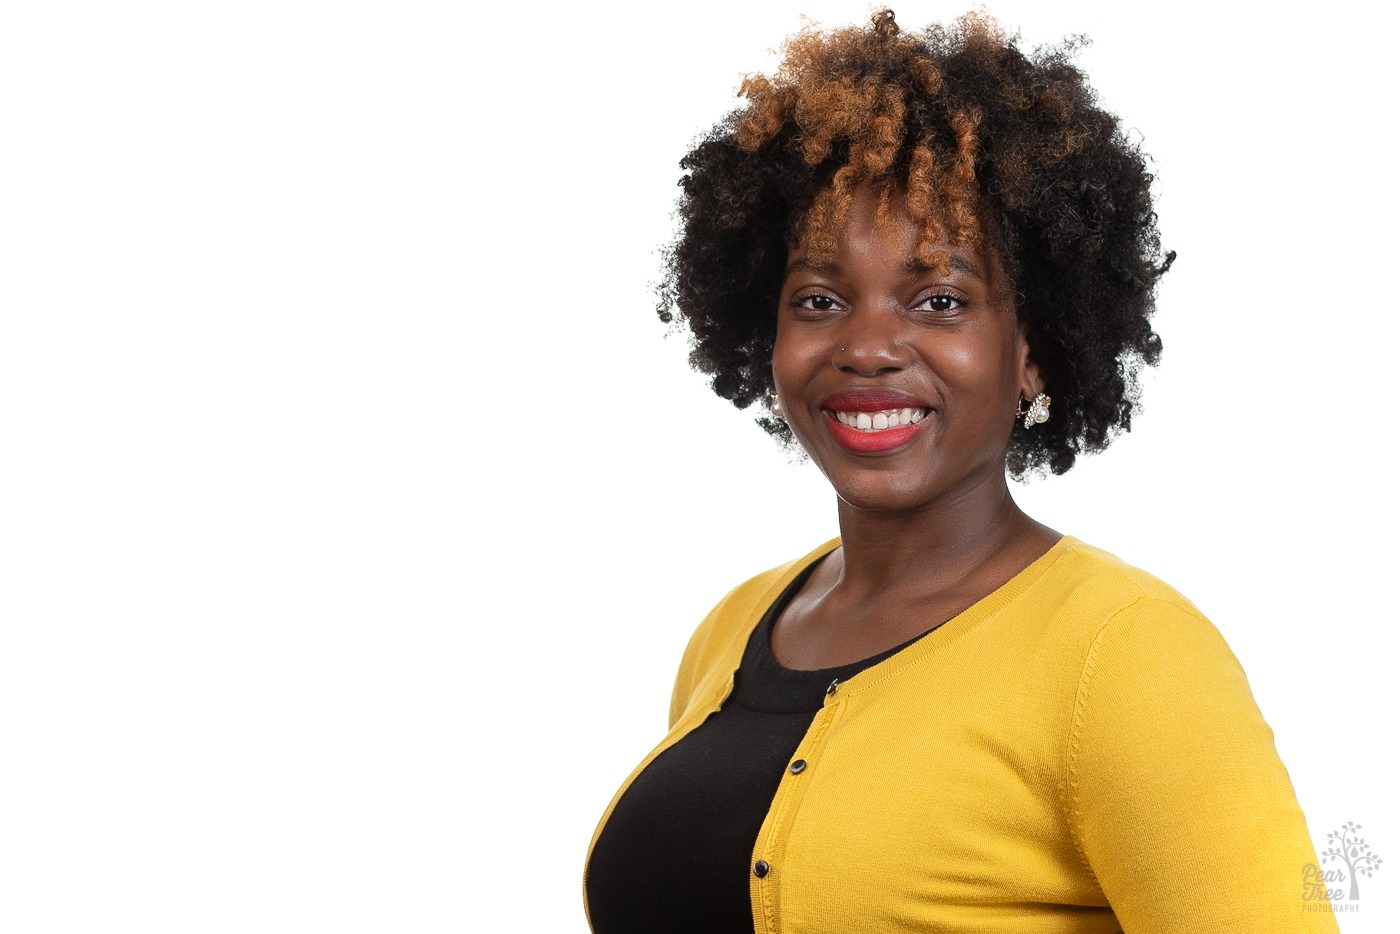 African American woman wearing red lipstick and a yellow cardigan over a black blouse is smiling for a professional headshot in Atlanta front of a white background